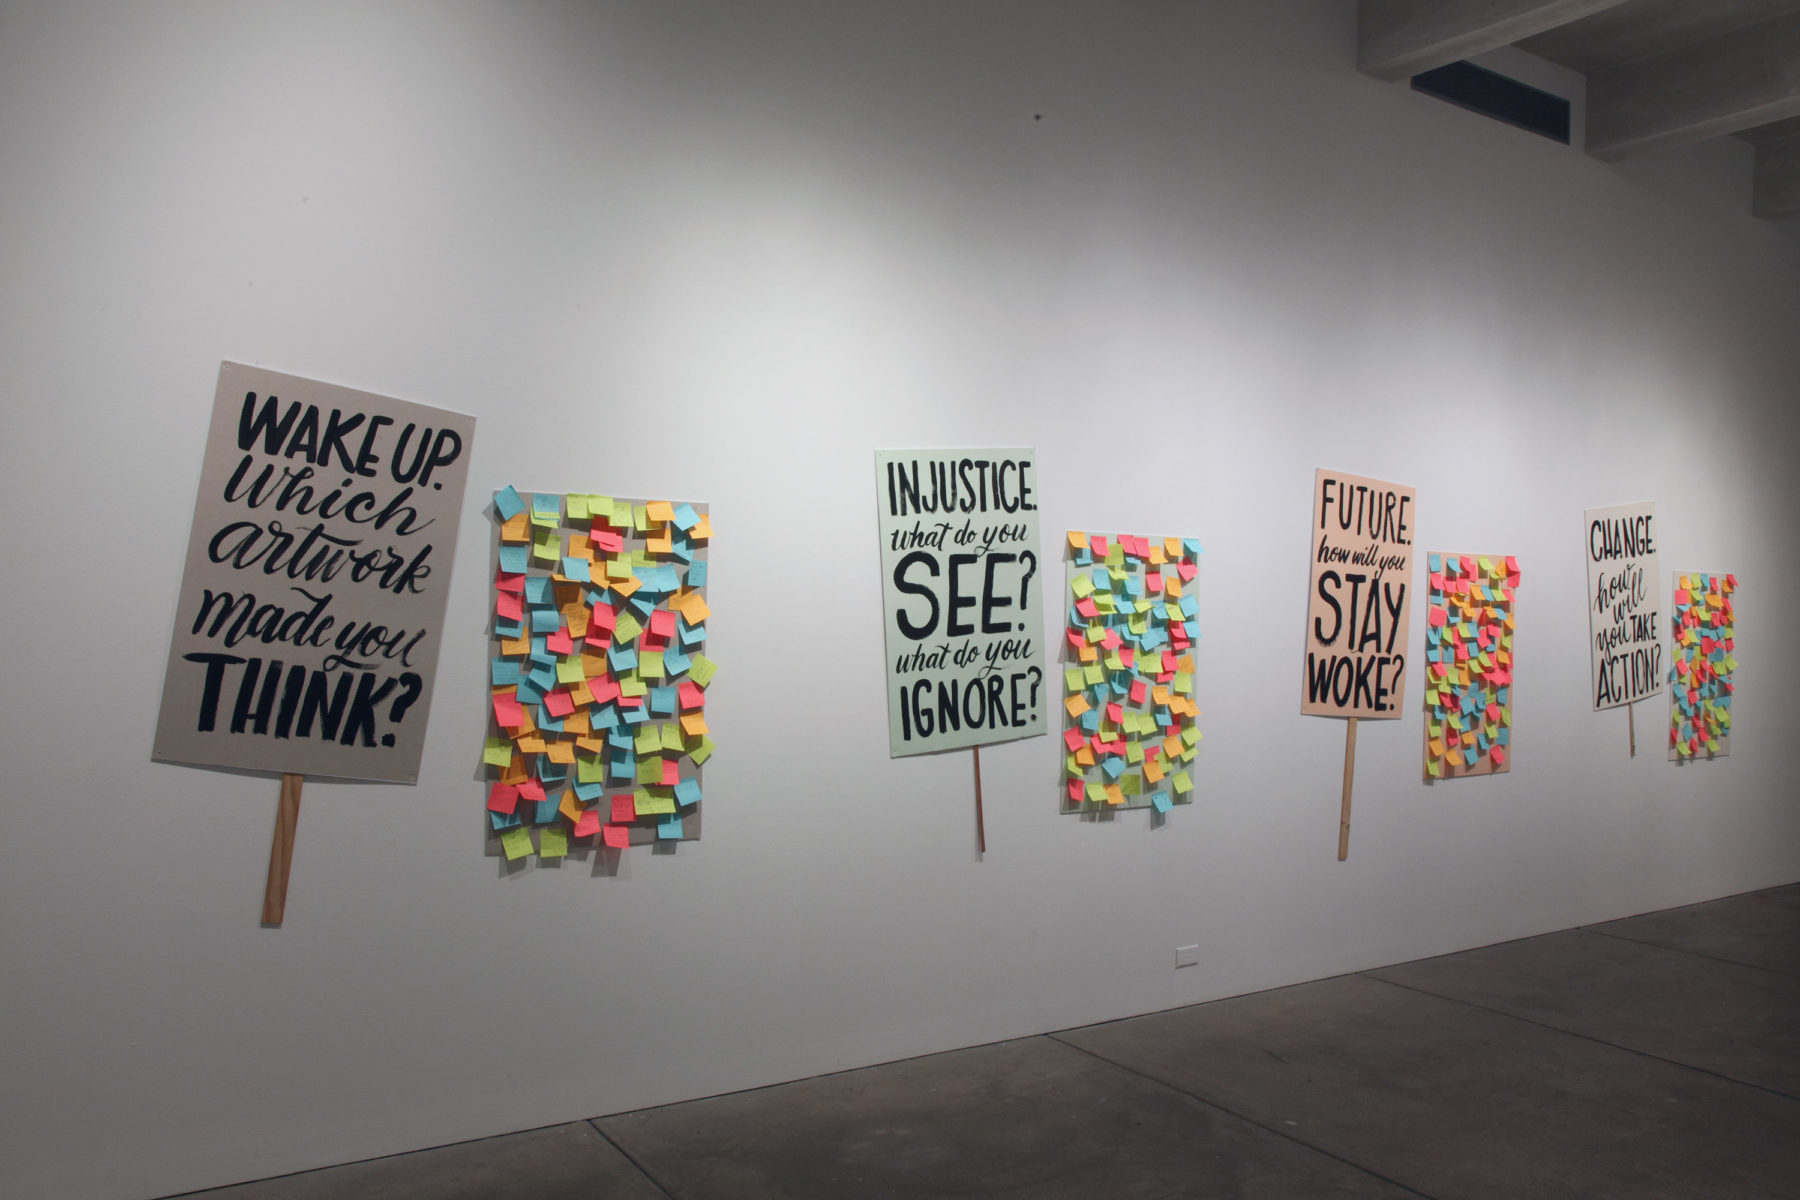 Response prompts styled to resemble protest signs hang on gallery walls adjacent to the corresponded responses, written on sticky notes